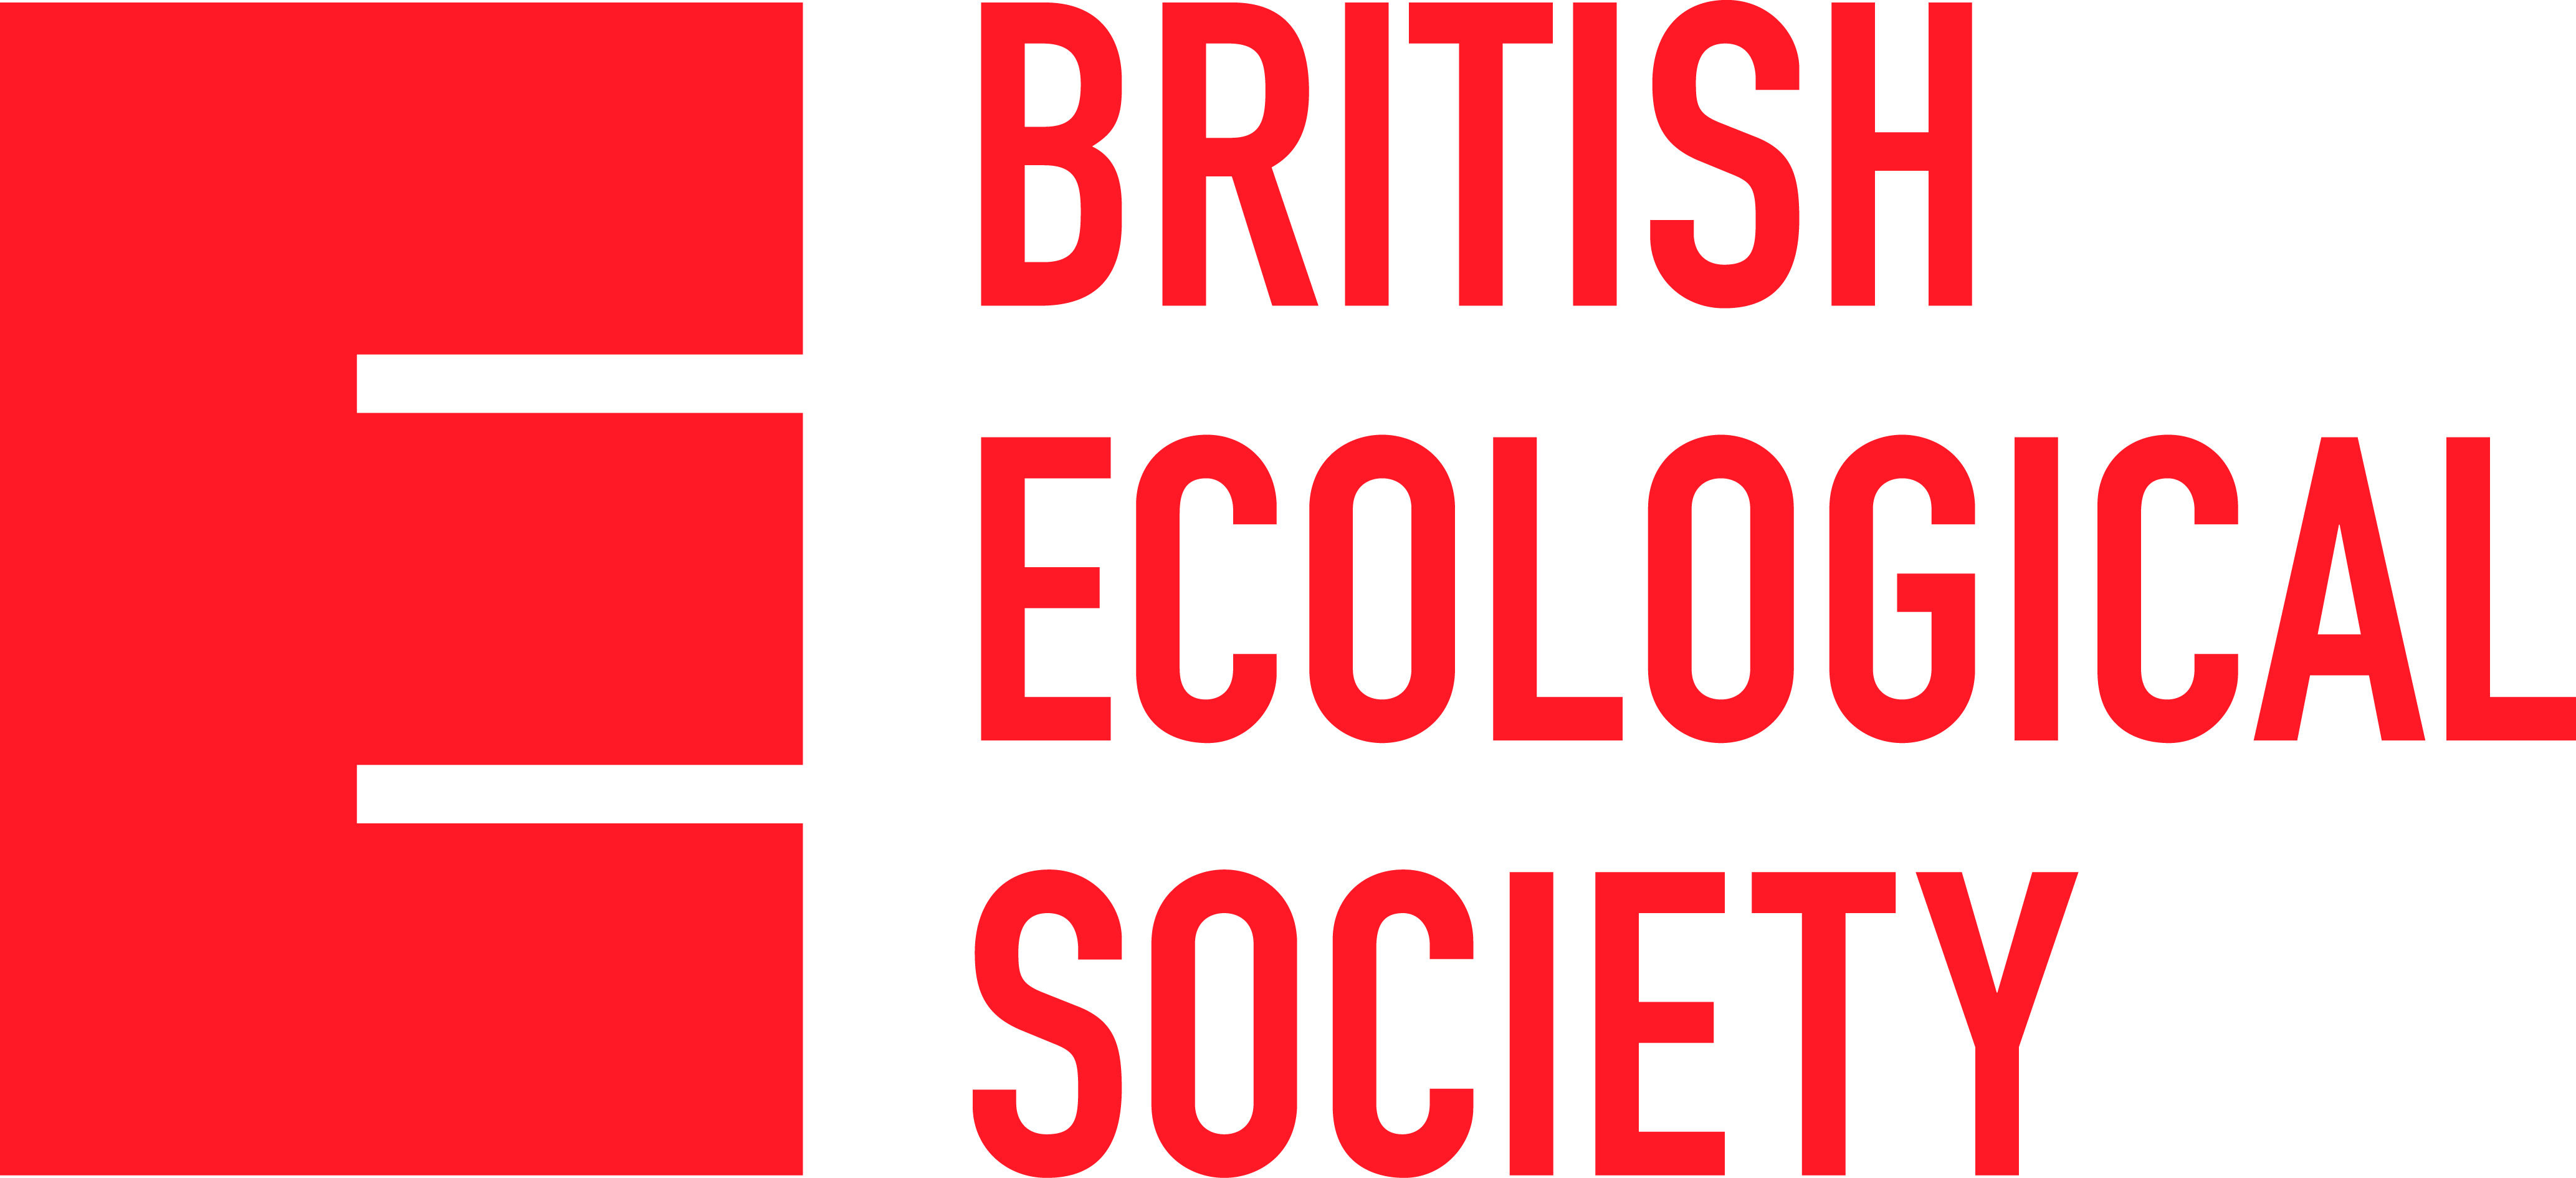 logo for The British Ecological Society